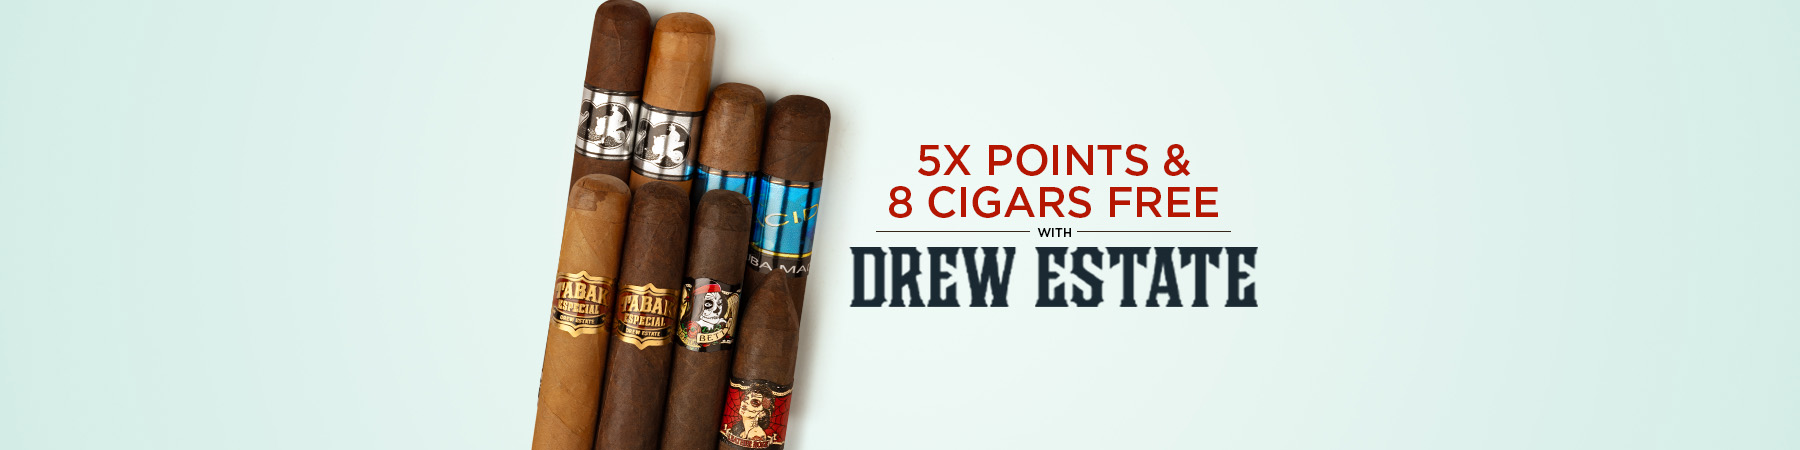 5x Loyalty Points + 8 Cigars Free